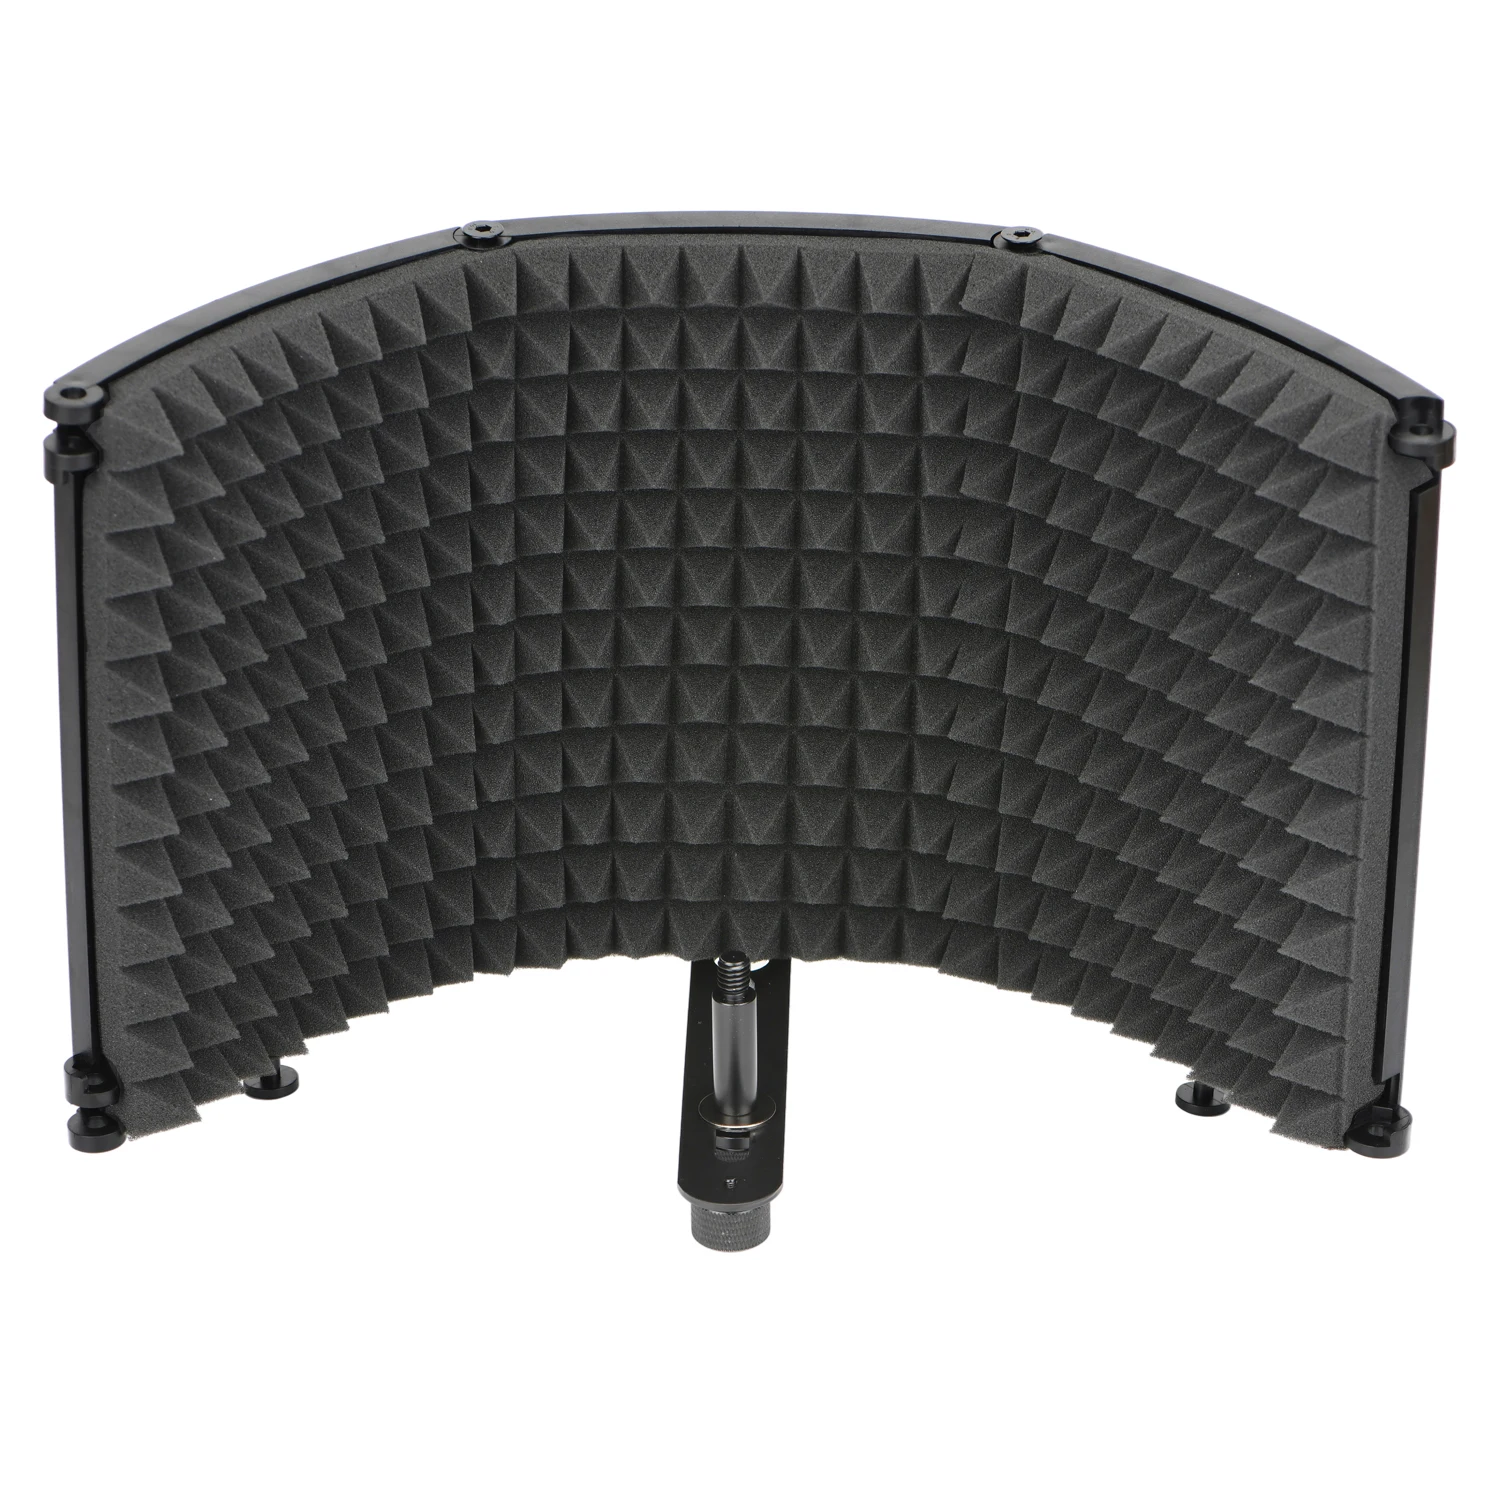 

Freeboss FB-PS68(69) Broadcast Studio Adjustable Angle Foldable Noise Reduction Sound Absorbing Microphone Wind Screen Shield